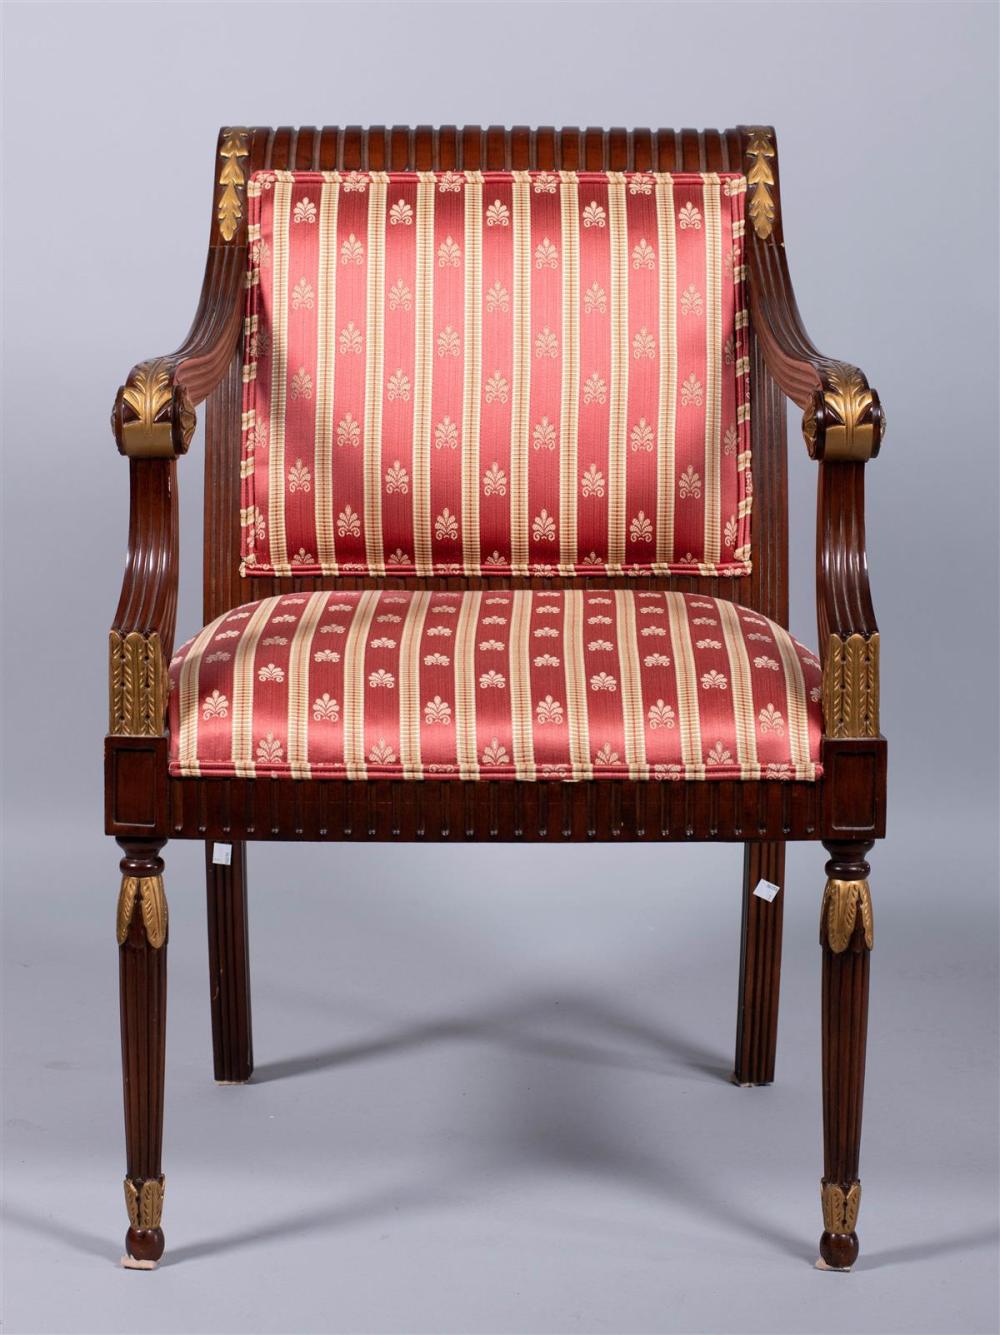 NEOCLASSICAL STYLE PARCEL-GILT